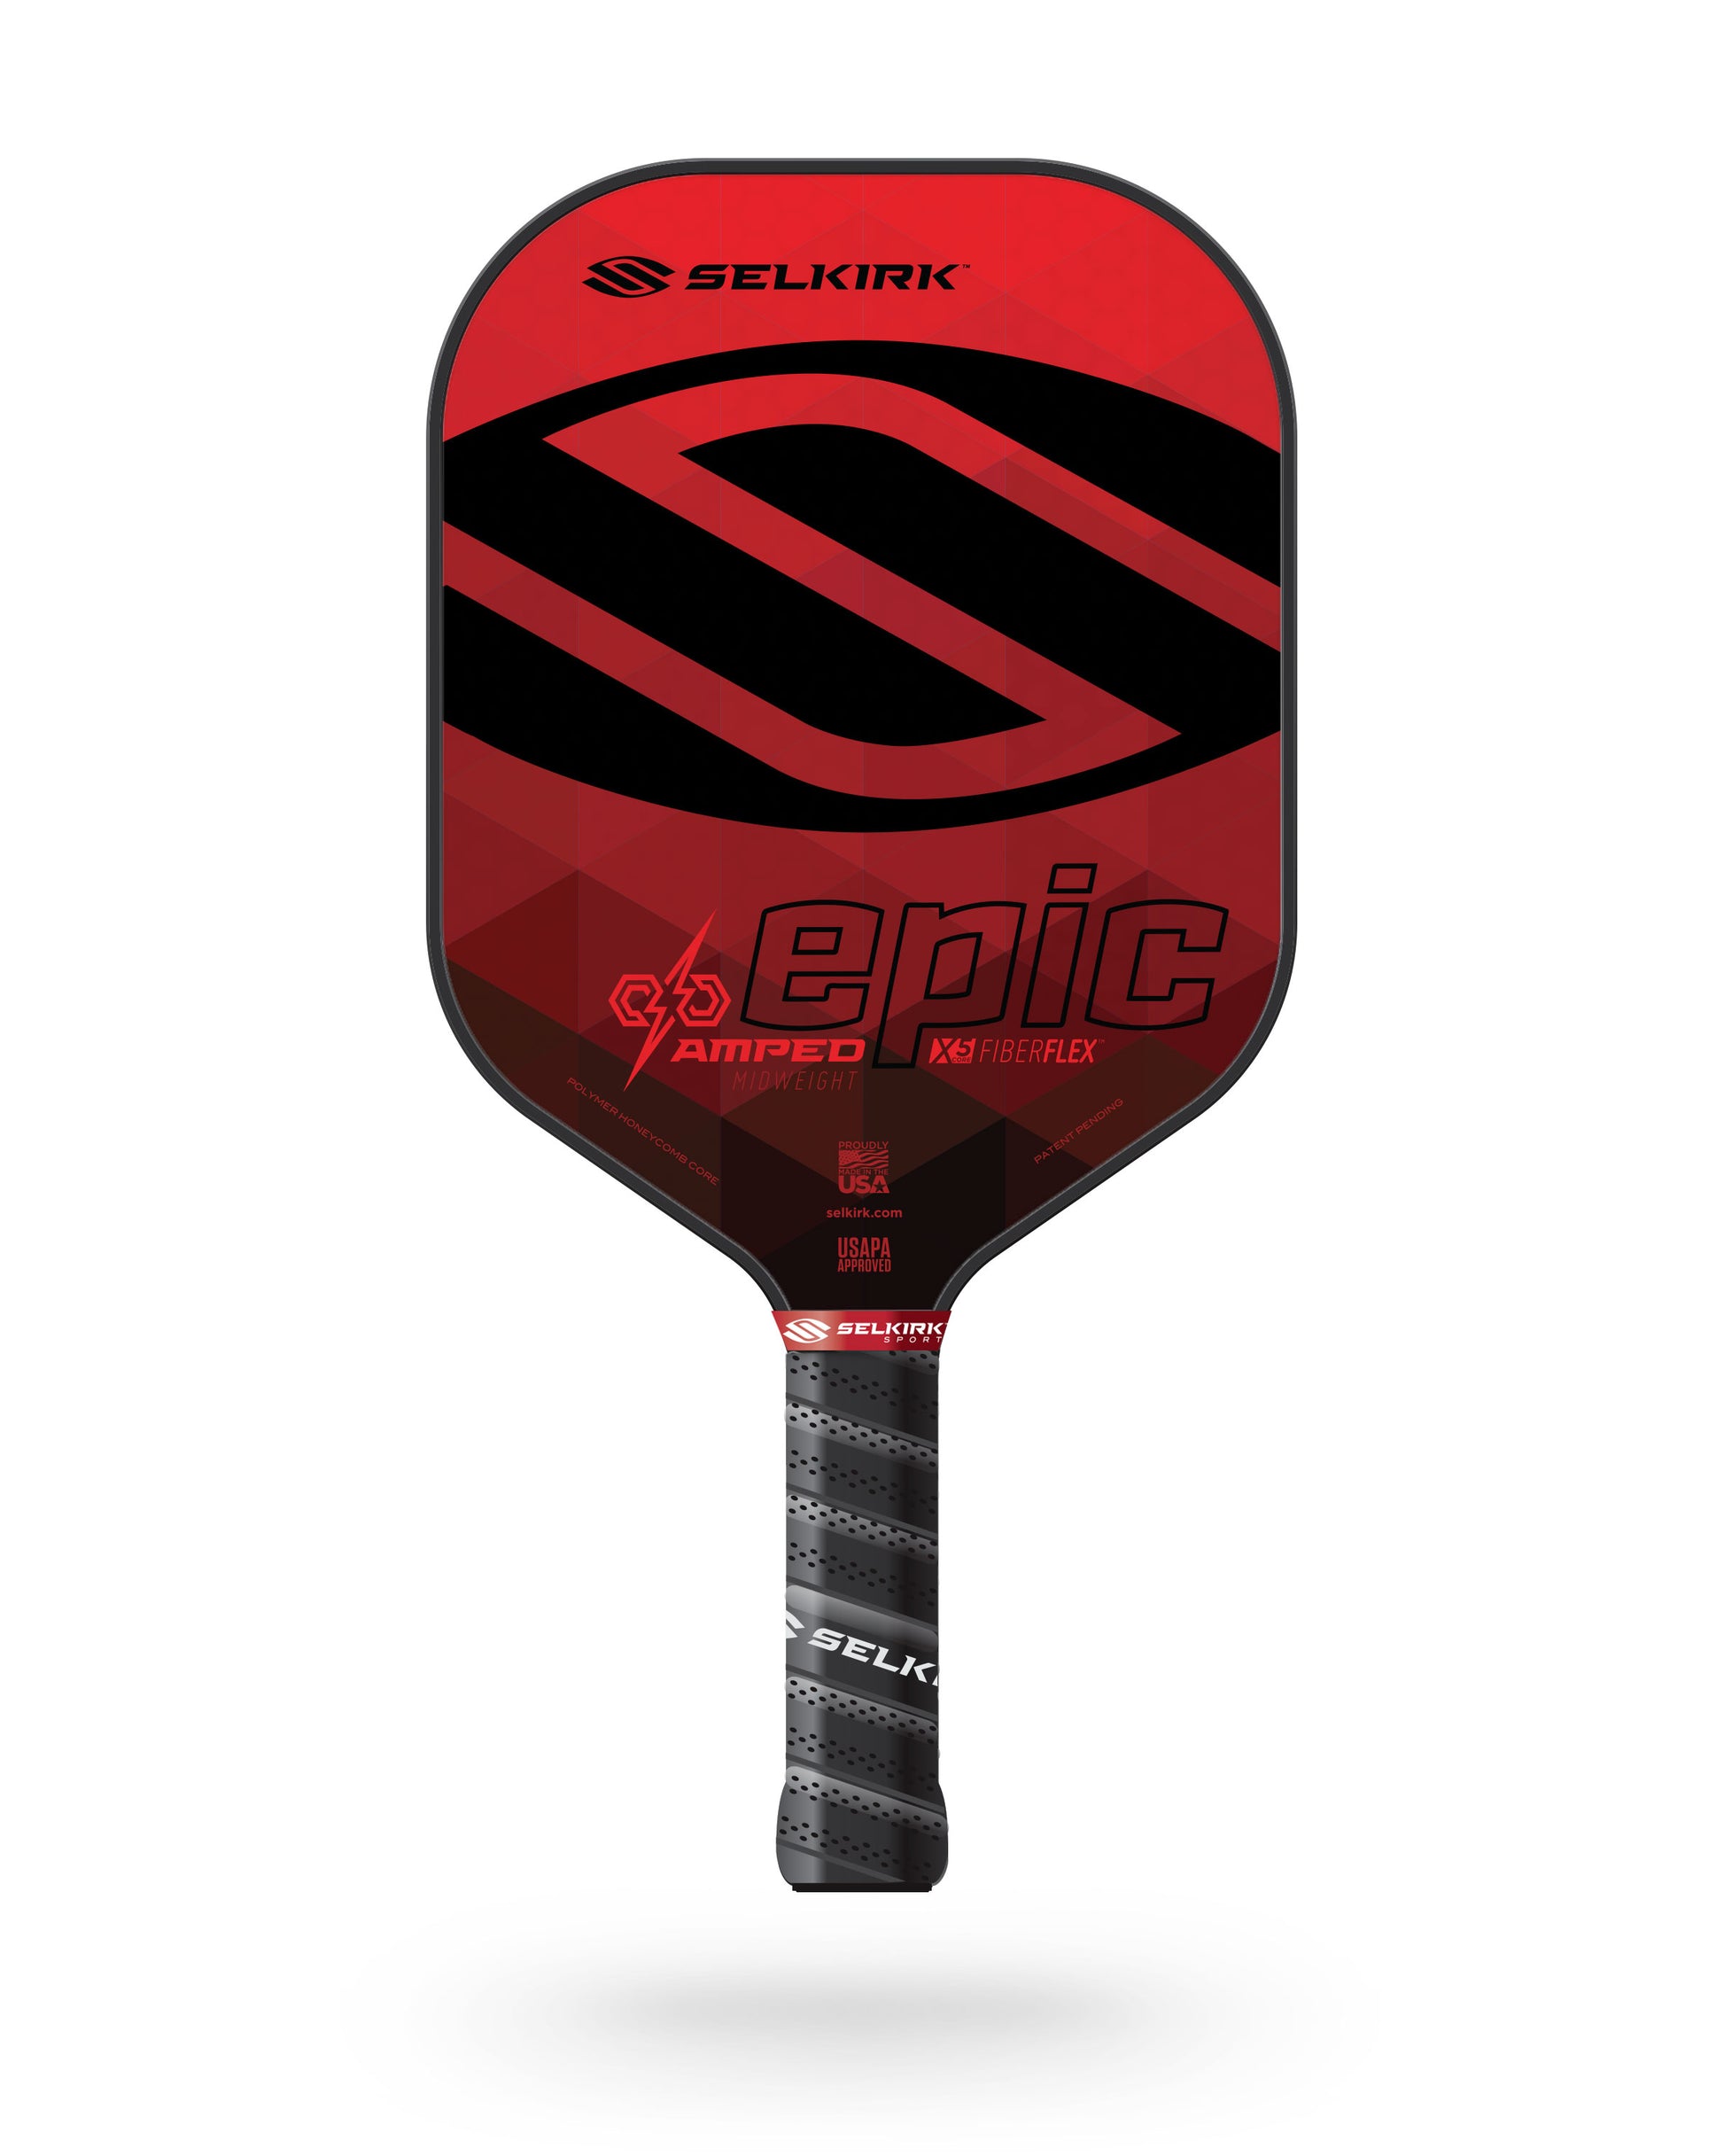 Selkirk AMPED Epic pickleball paddle in red and black